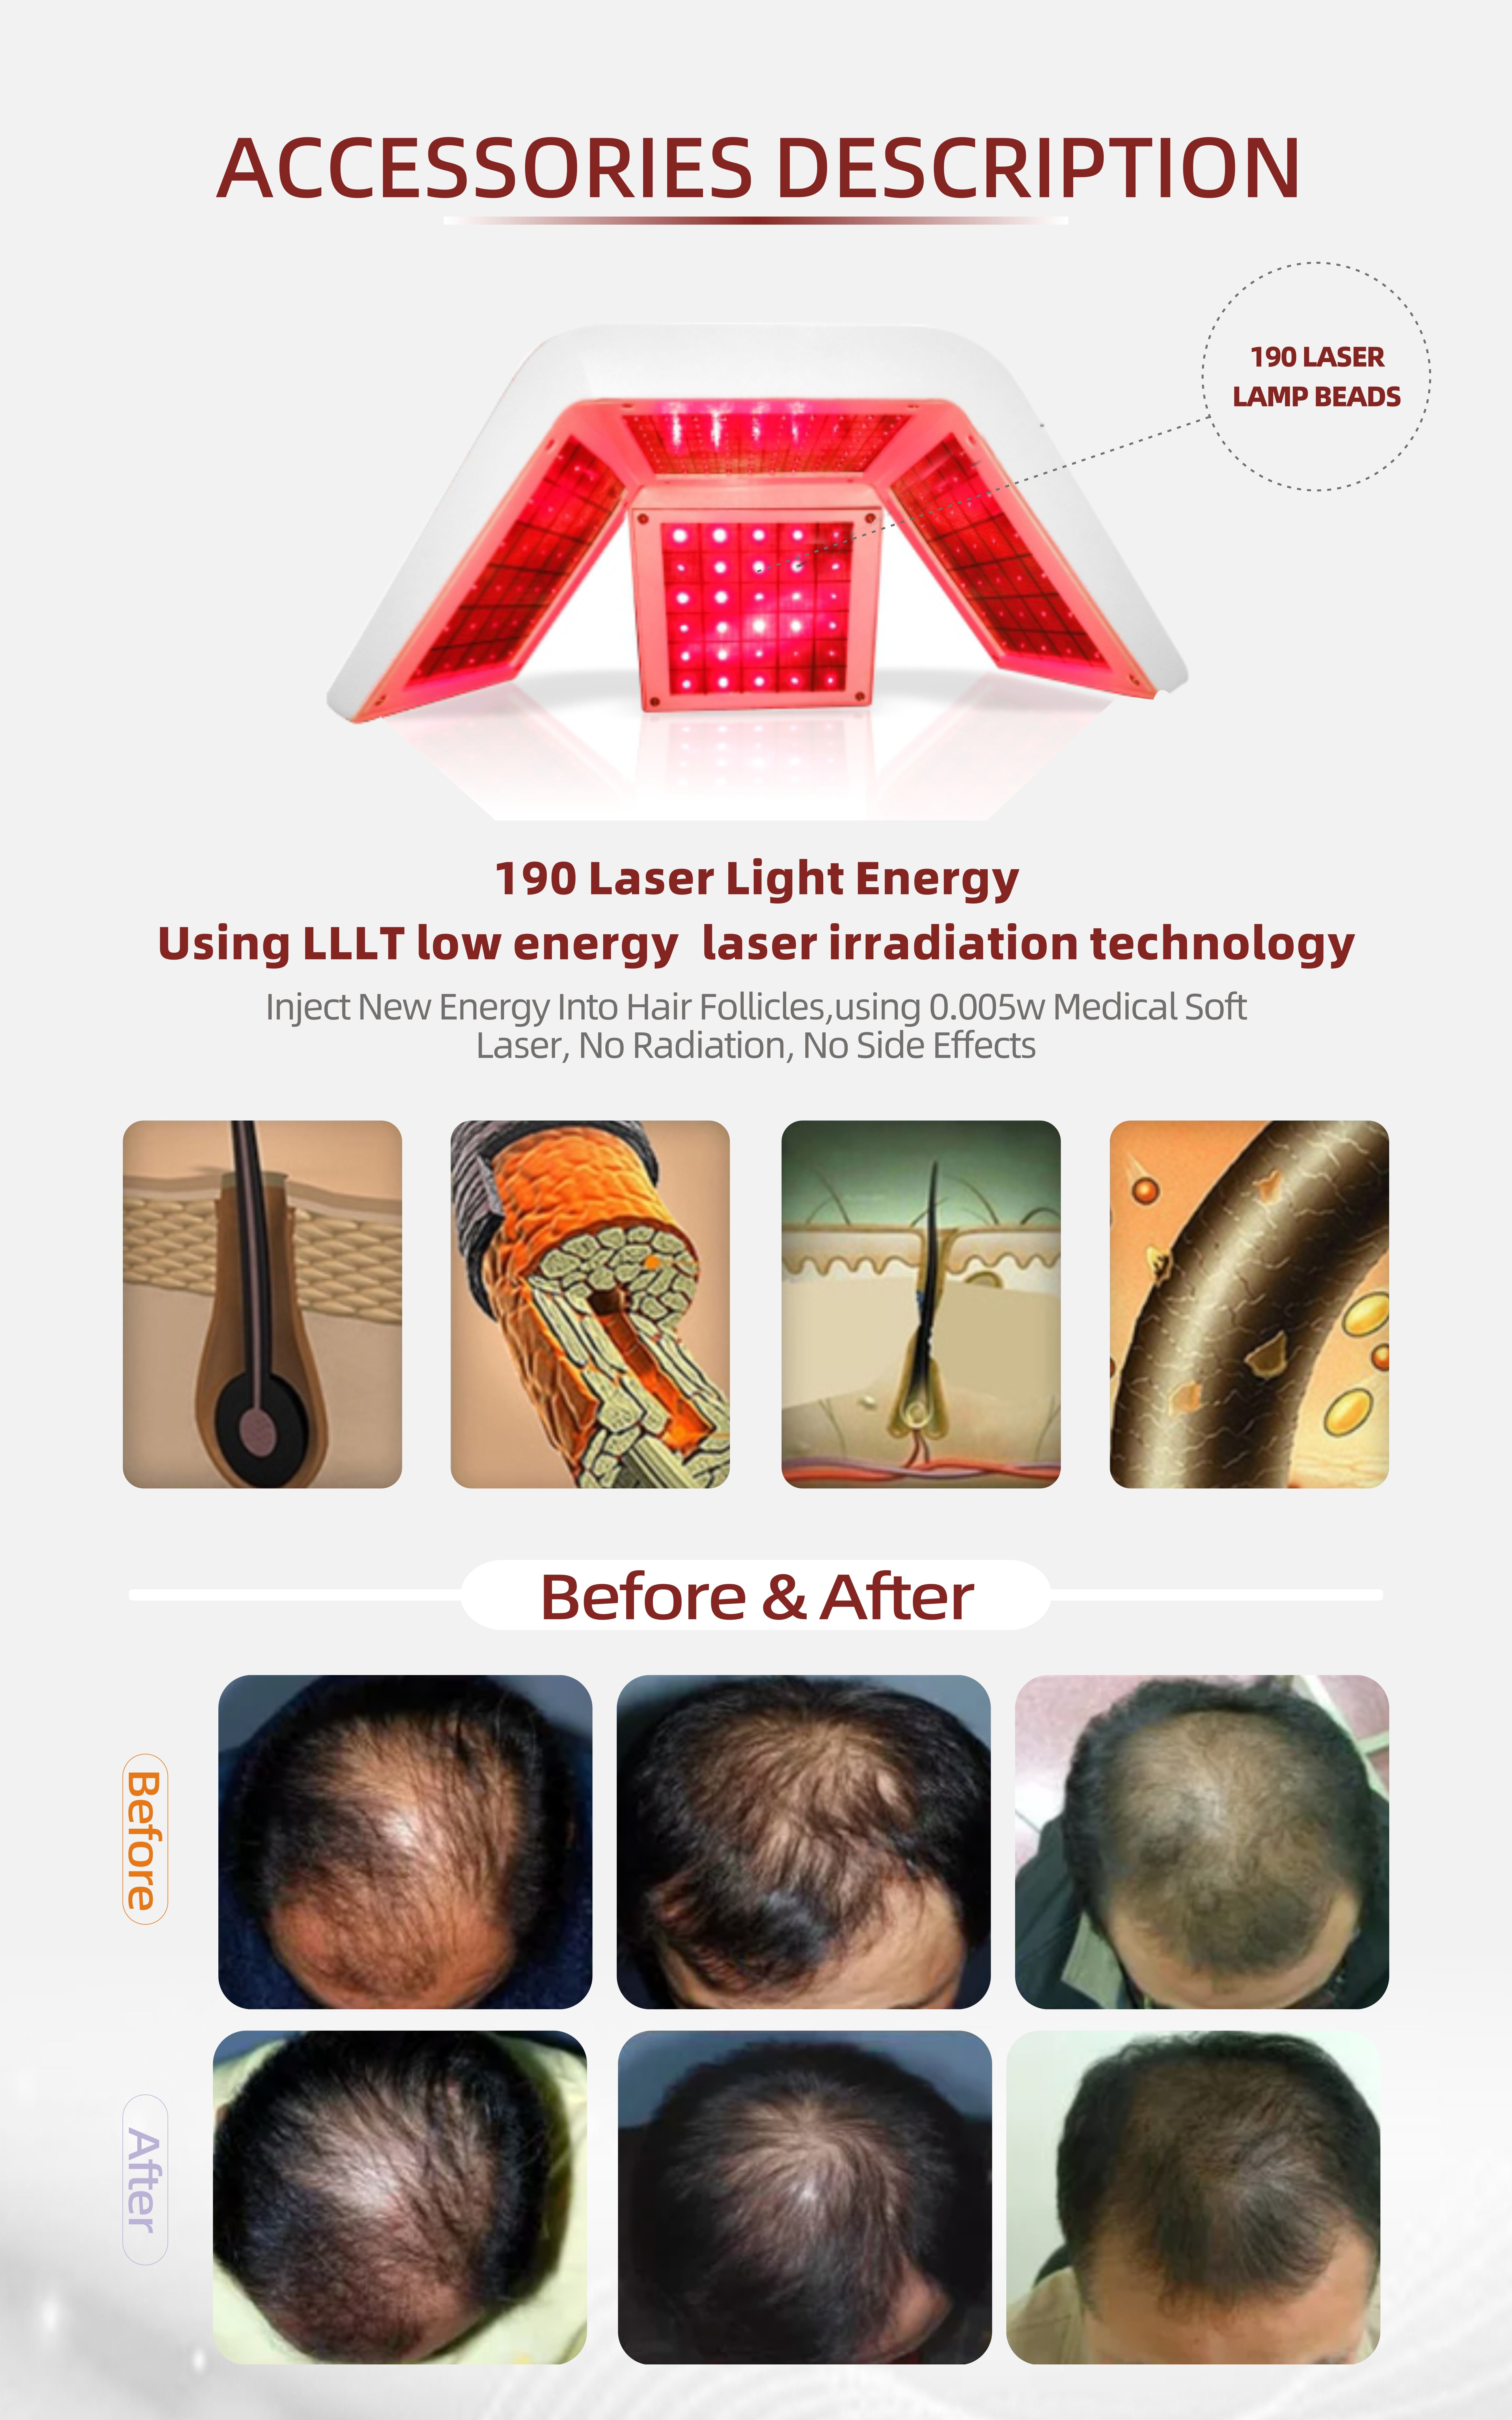 Multifunctional Hair Regrowth 650nm Diode Laser With Skin Analysis Camera Anti Hair Growth Cold Laser Comb Machine For Hair Loss Treatment Multifunctional 650nm Diode Laser Hair Regrowth Machine - Honkay laser hair regrowth machine,laser hair growth machine,hair laser regrowth machine